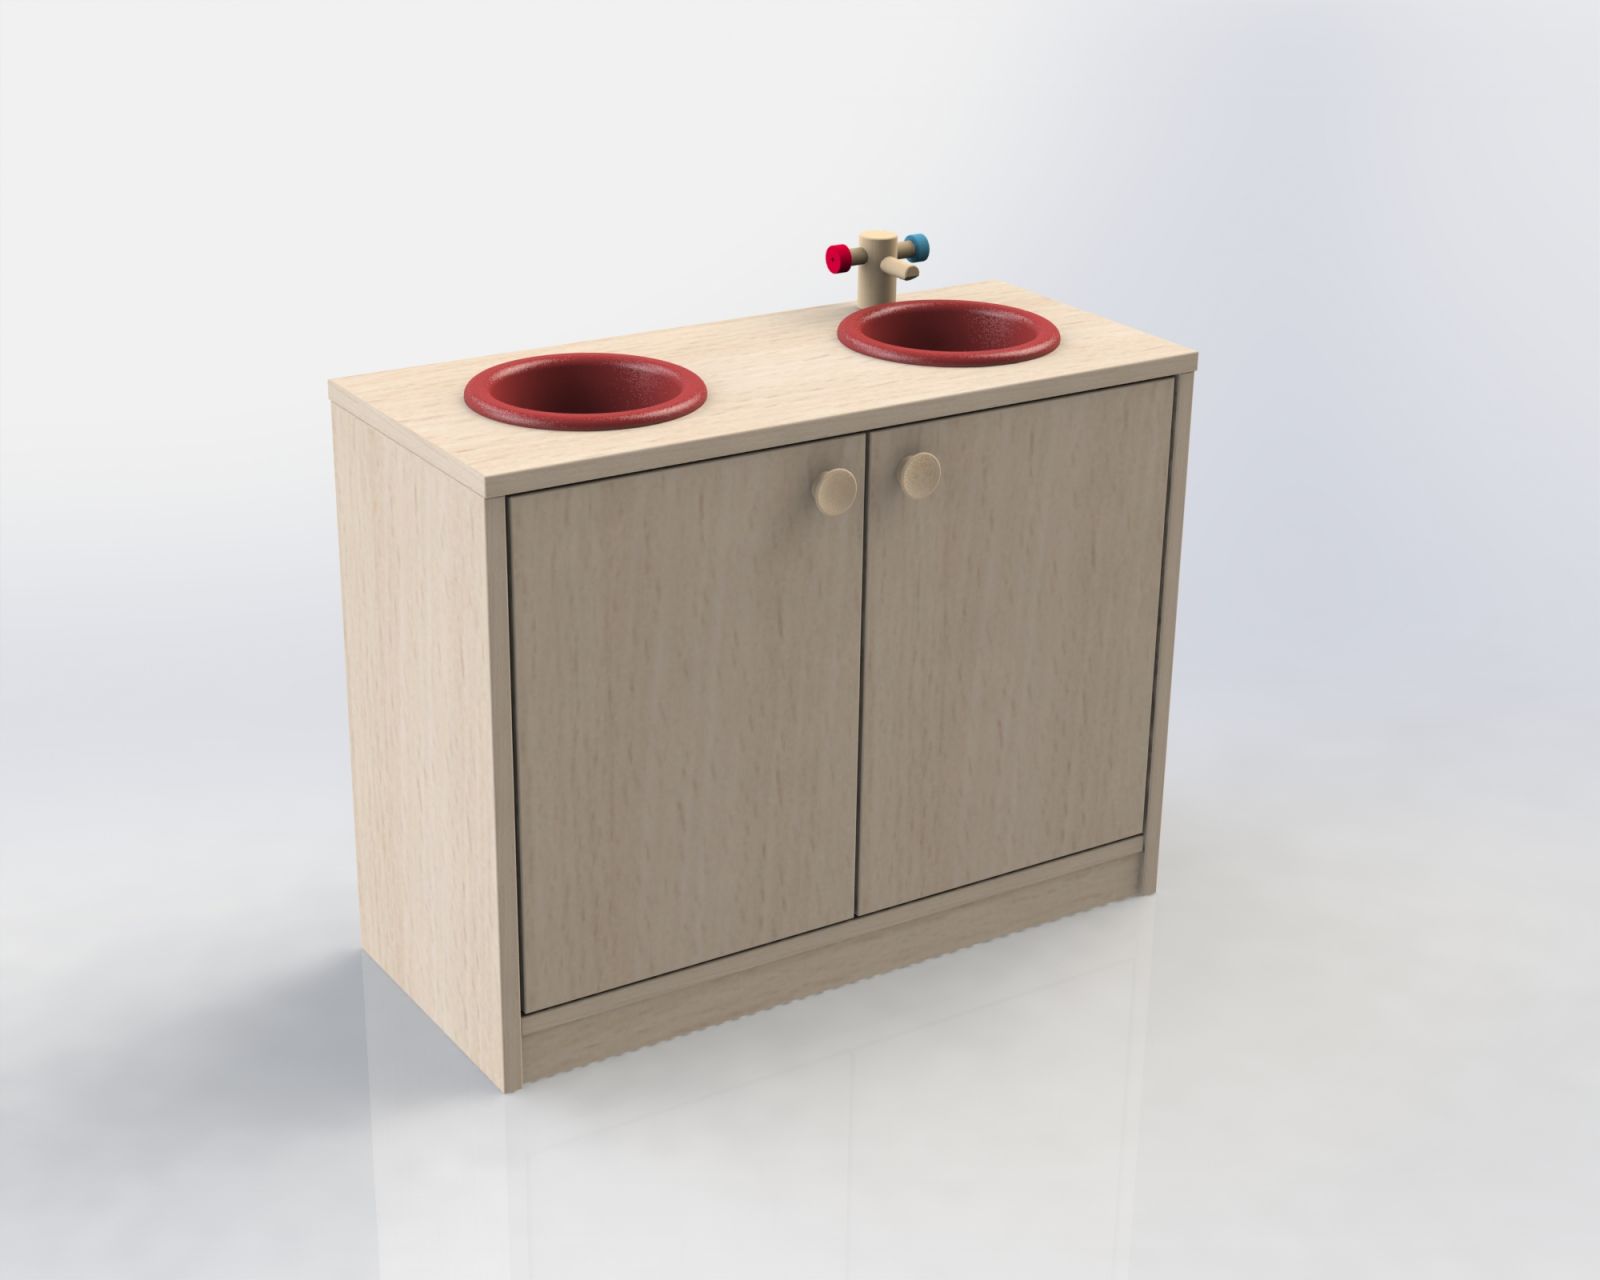 Cupboard with sinks